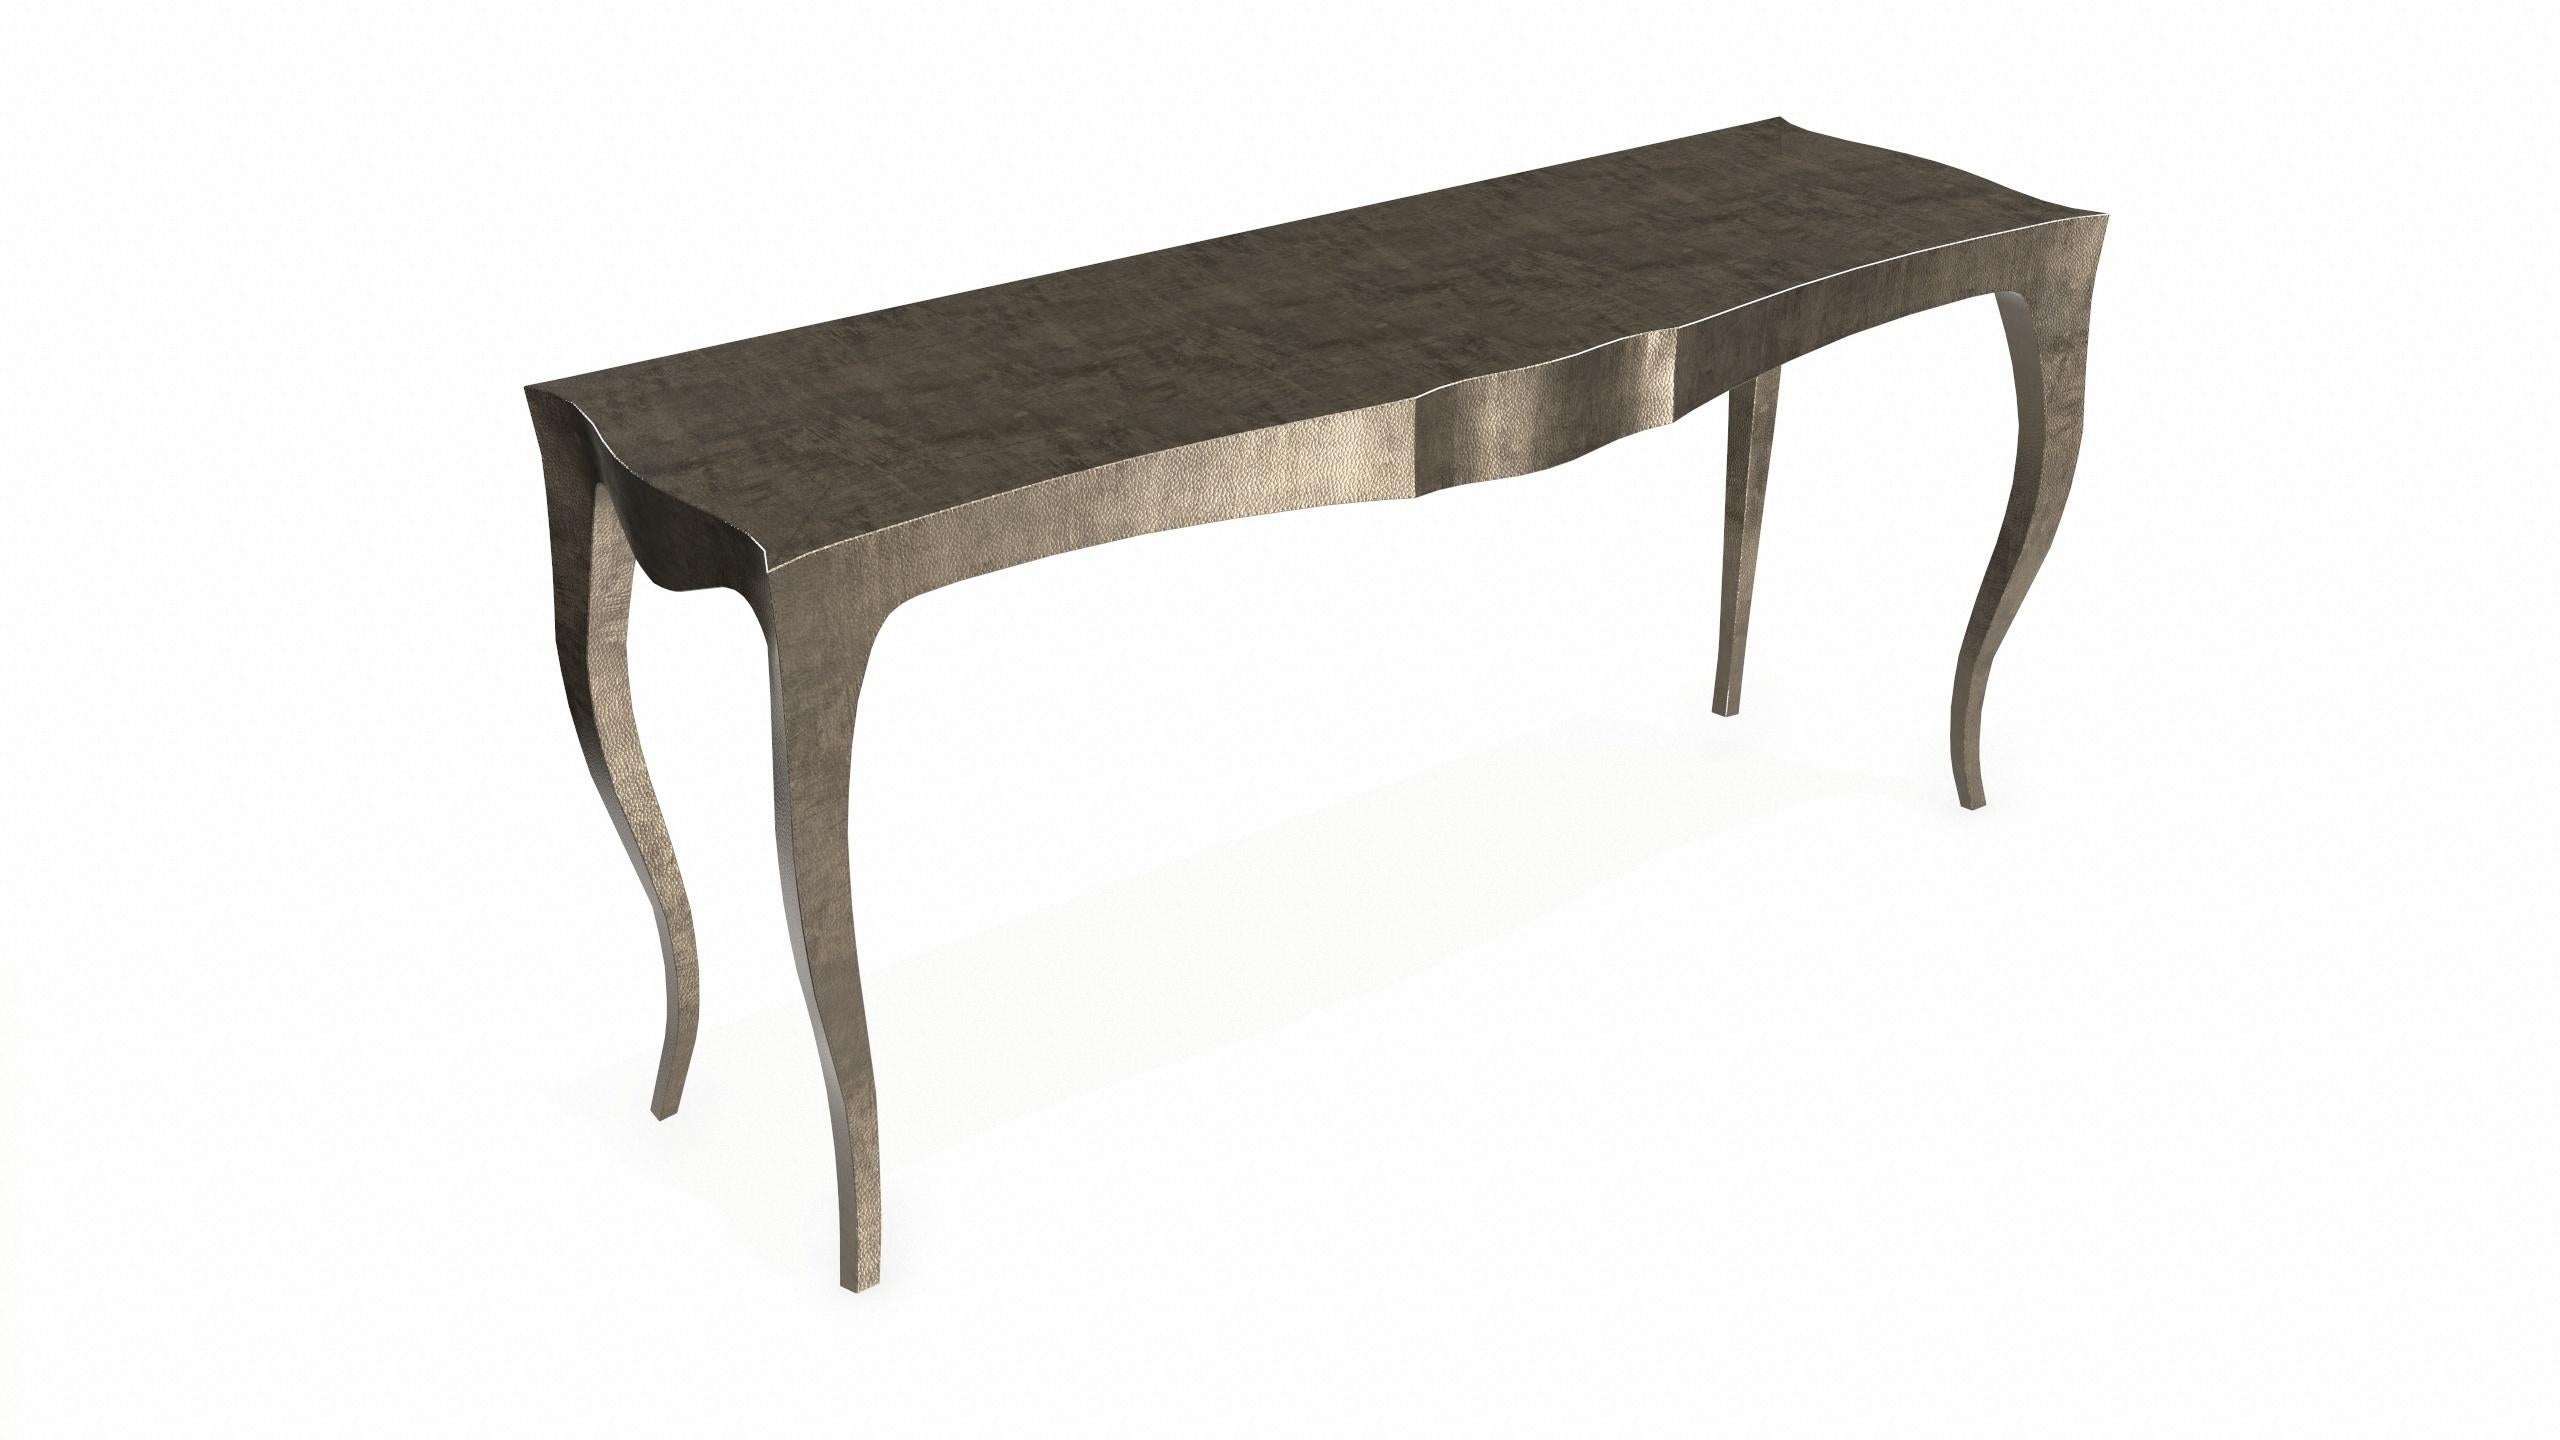 Other Louise Console Art Deco Side Tables Mid. Hammered Antique Bronze by Paul Mathieu For Sale